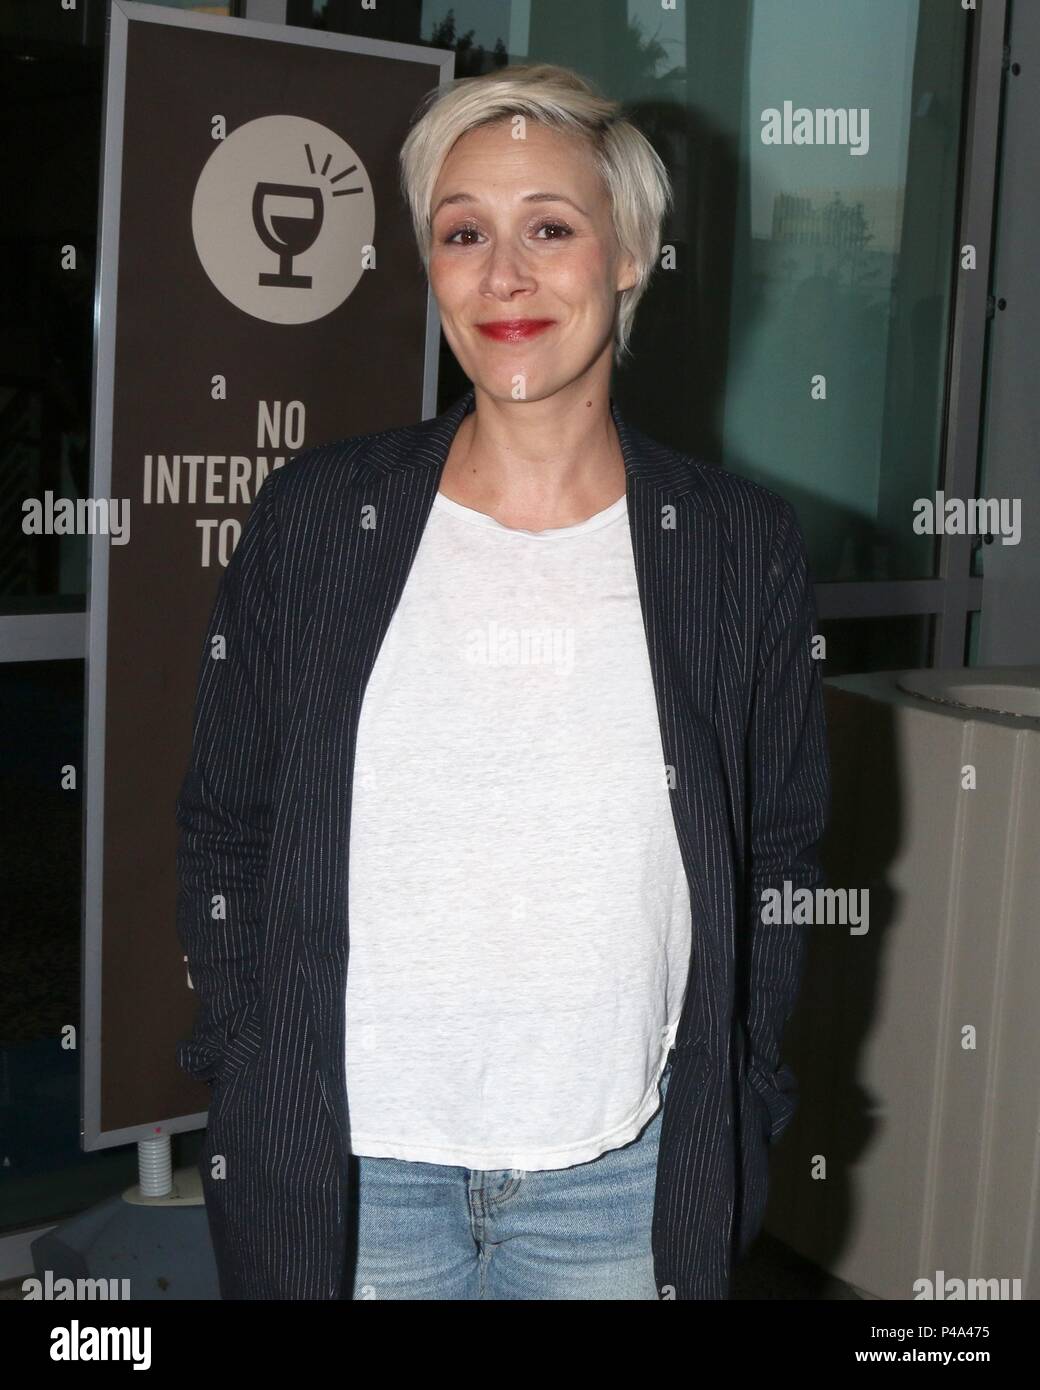 Los Angeles, CA, USA. 20th June, 2018. Liza Weil at arrivals for THE HUMANS Opening Night, Center Theatre Group - Ahmanson Theatre, Los Angeles, CA June 20, 2018. Credit: Priscilla Grant/Everett Collection/Alamy Live News Stock Photo